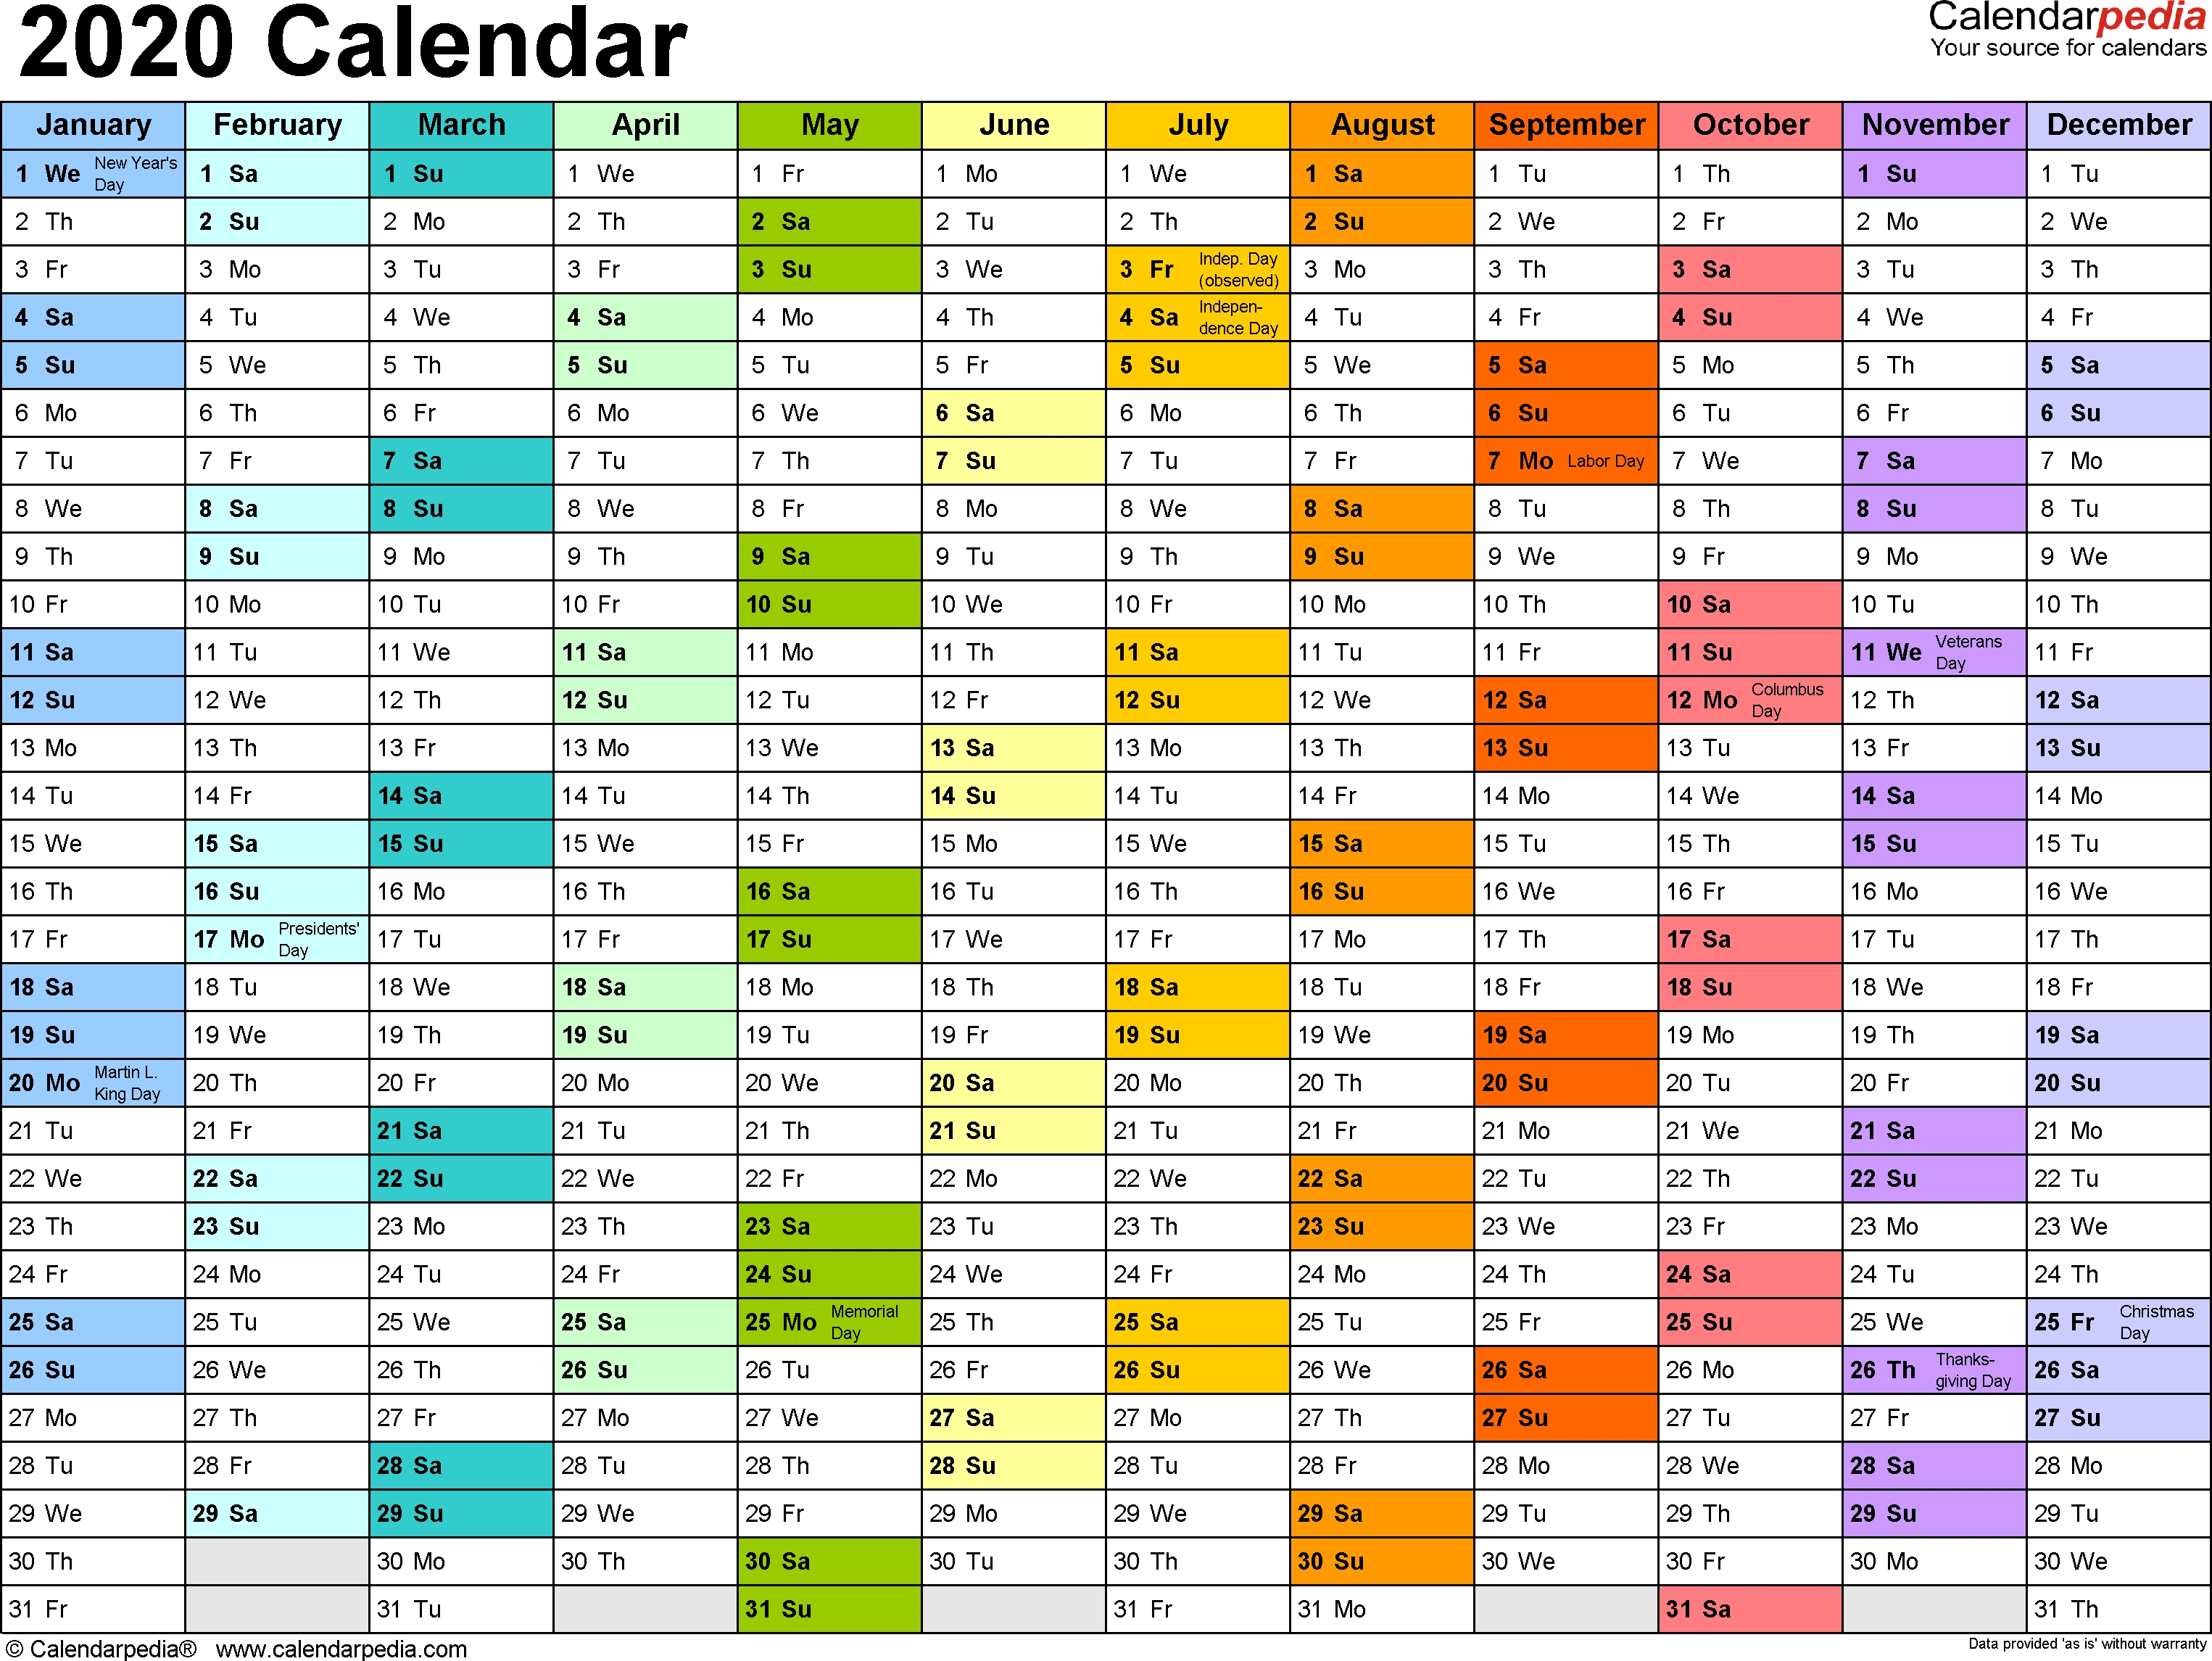 Calendarpedia - Your Source For Calendars 2020 South African Public Holidays